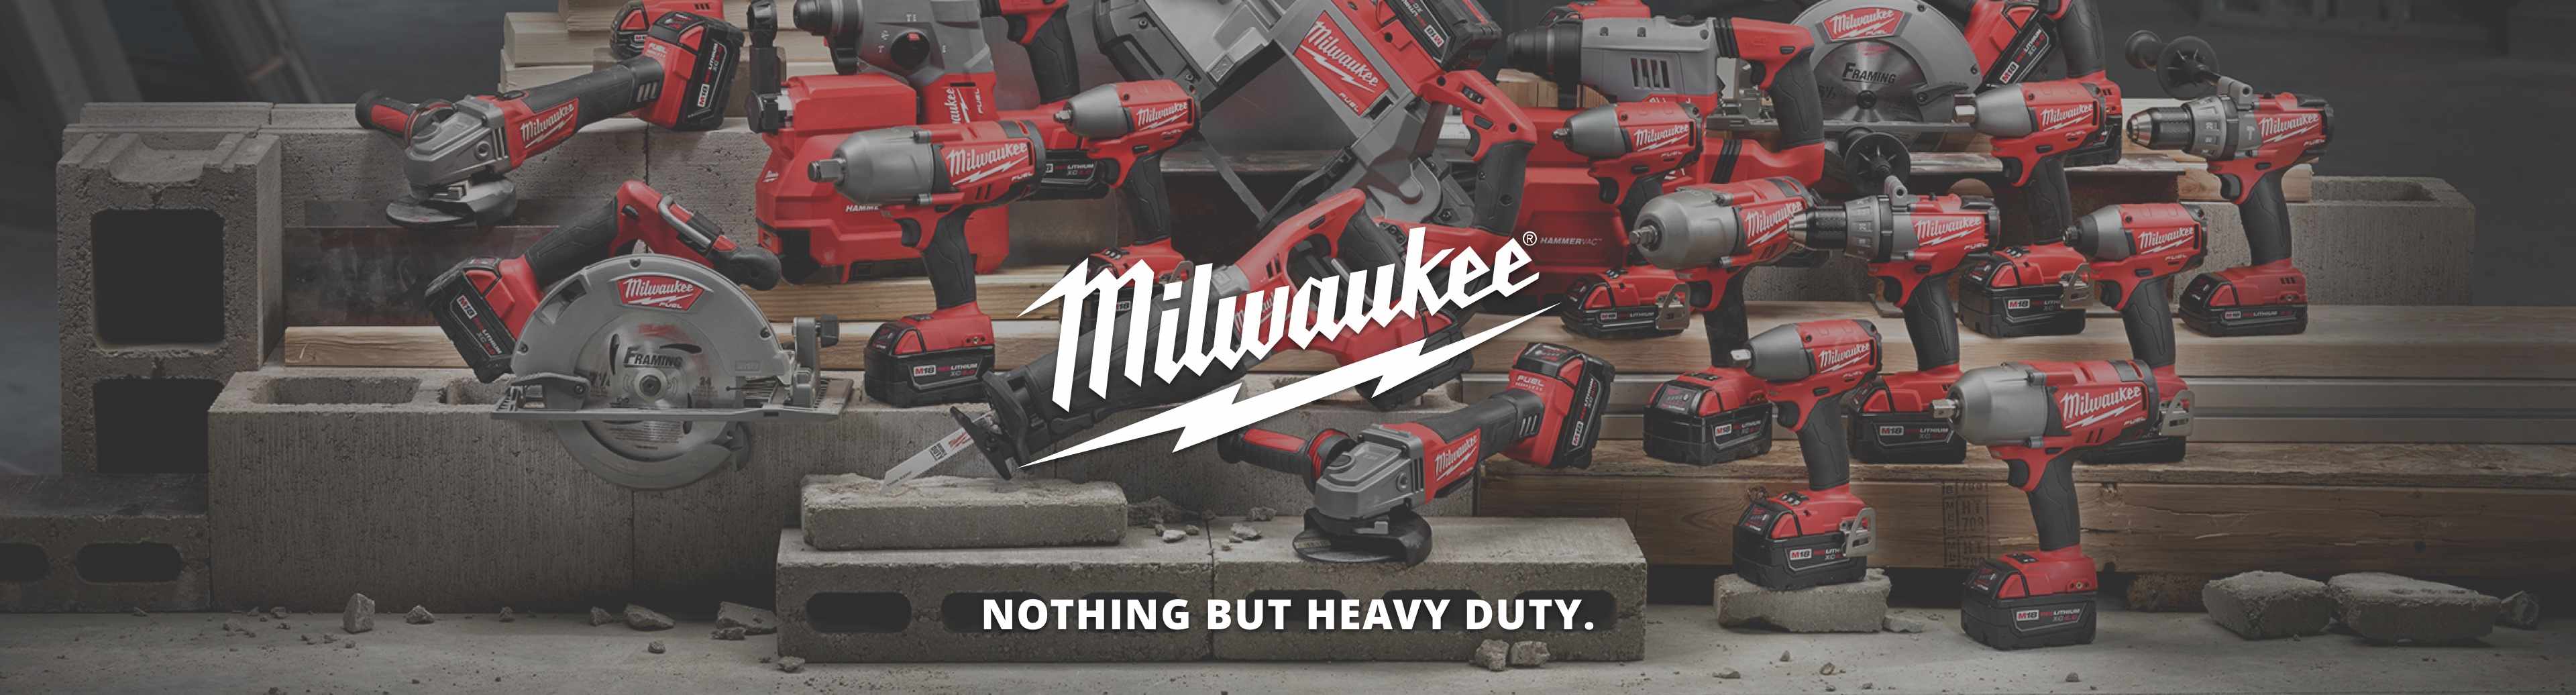 Milwaukee Power Tools with logo with tagline Nothing But Heavy Duty